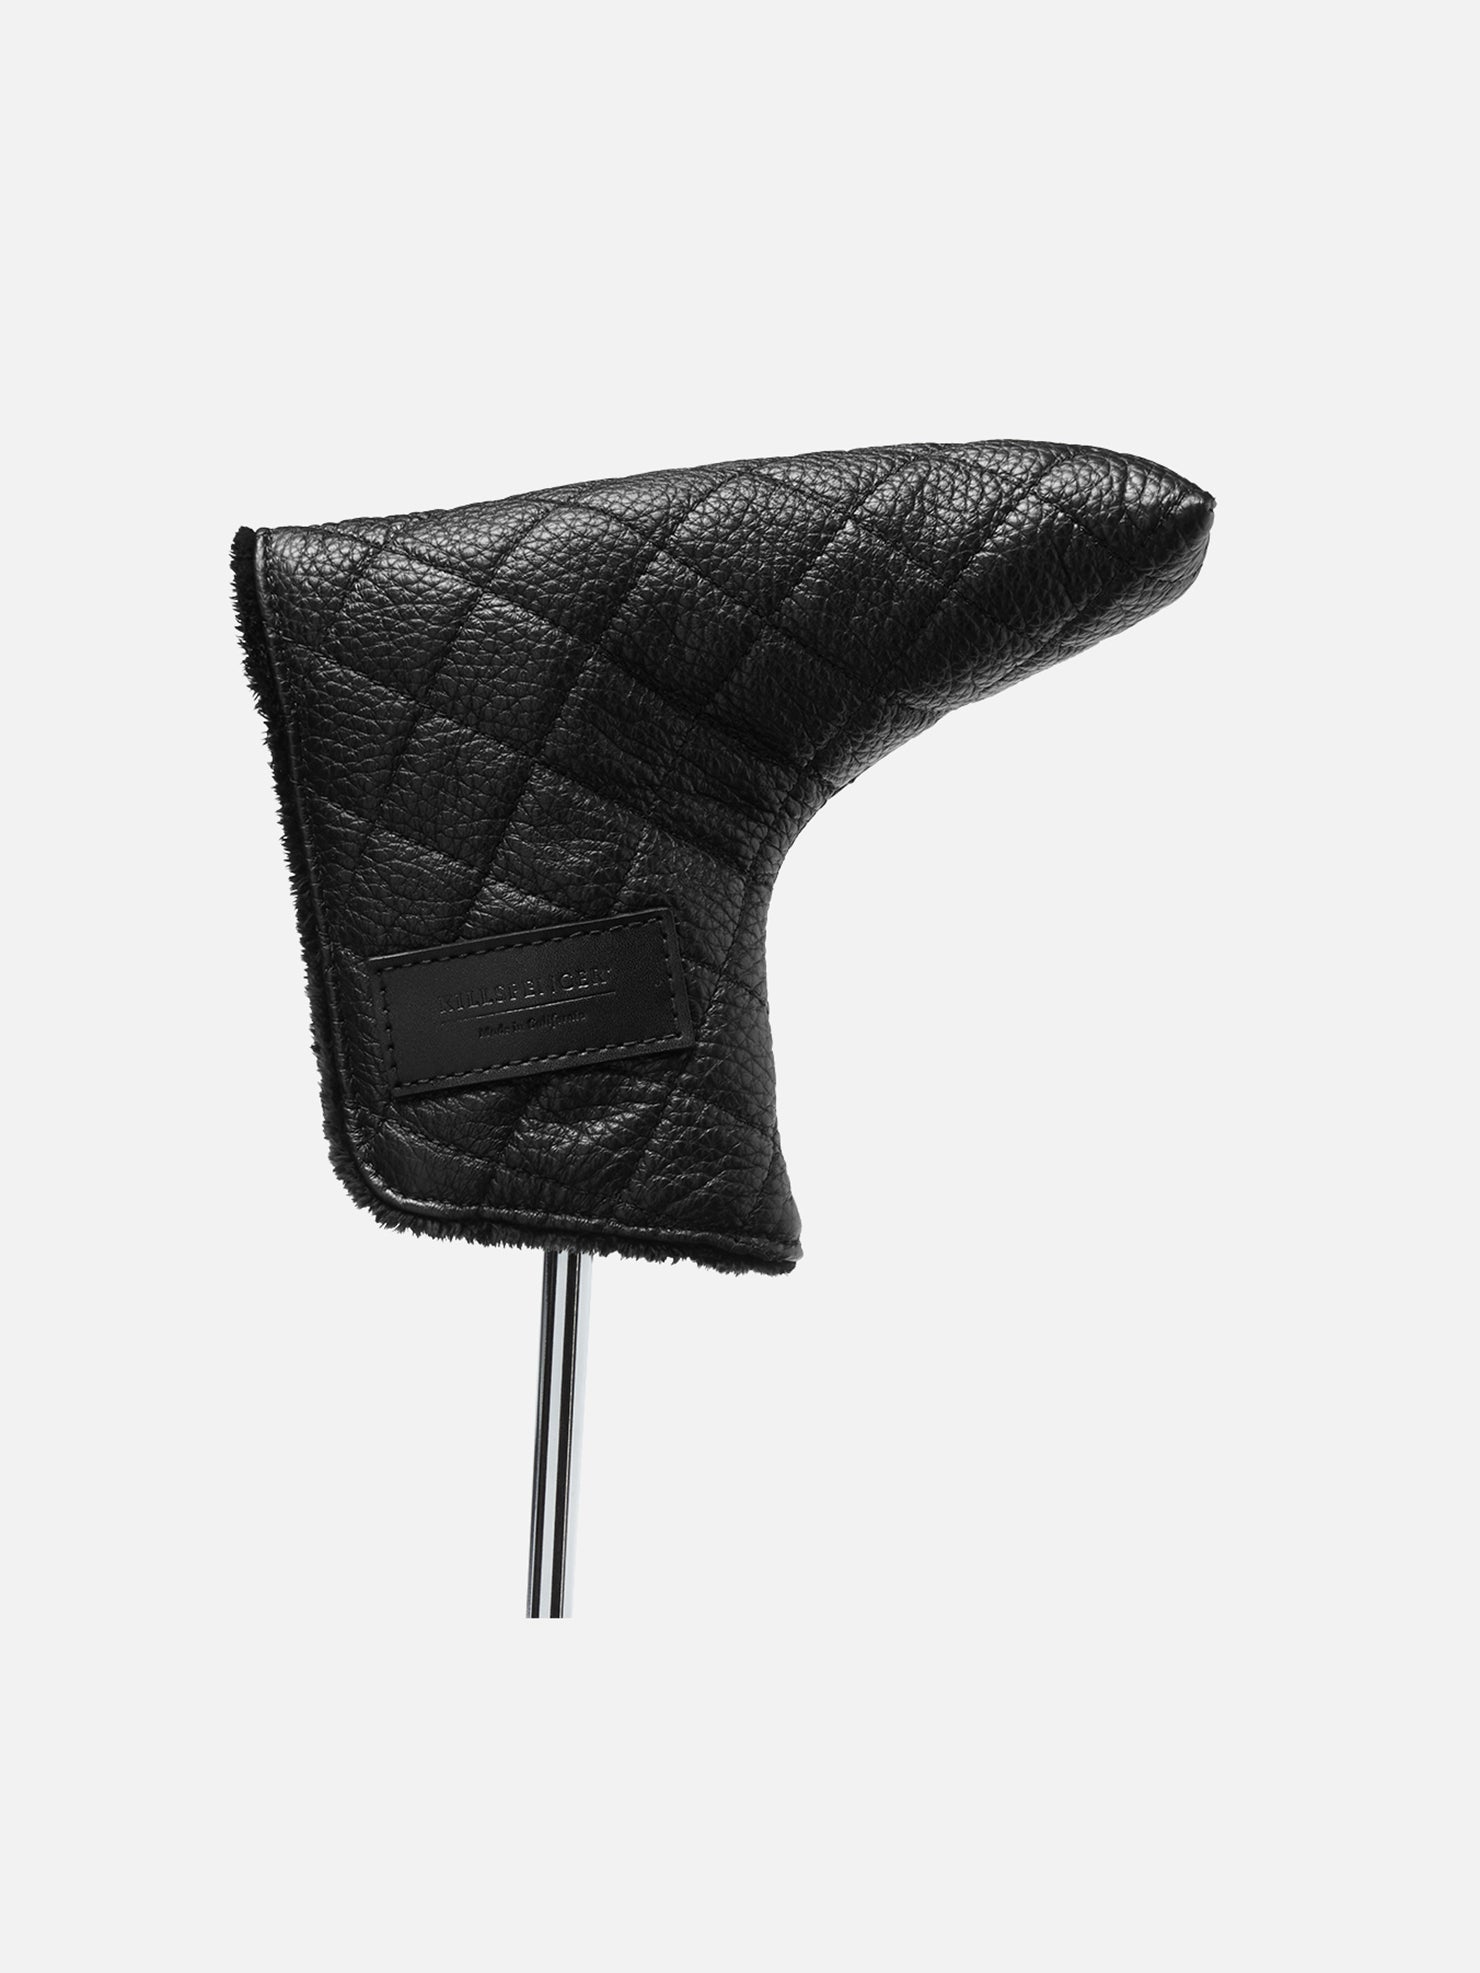 PUTTER COVER | KILLSPENCER® - Black Quilted Leather